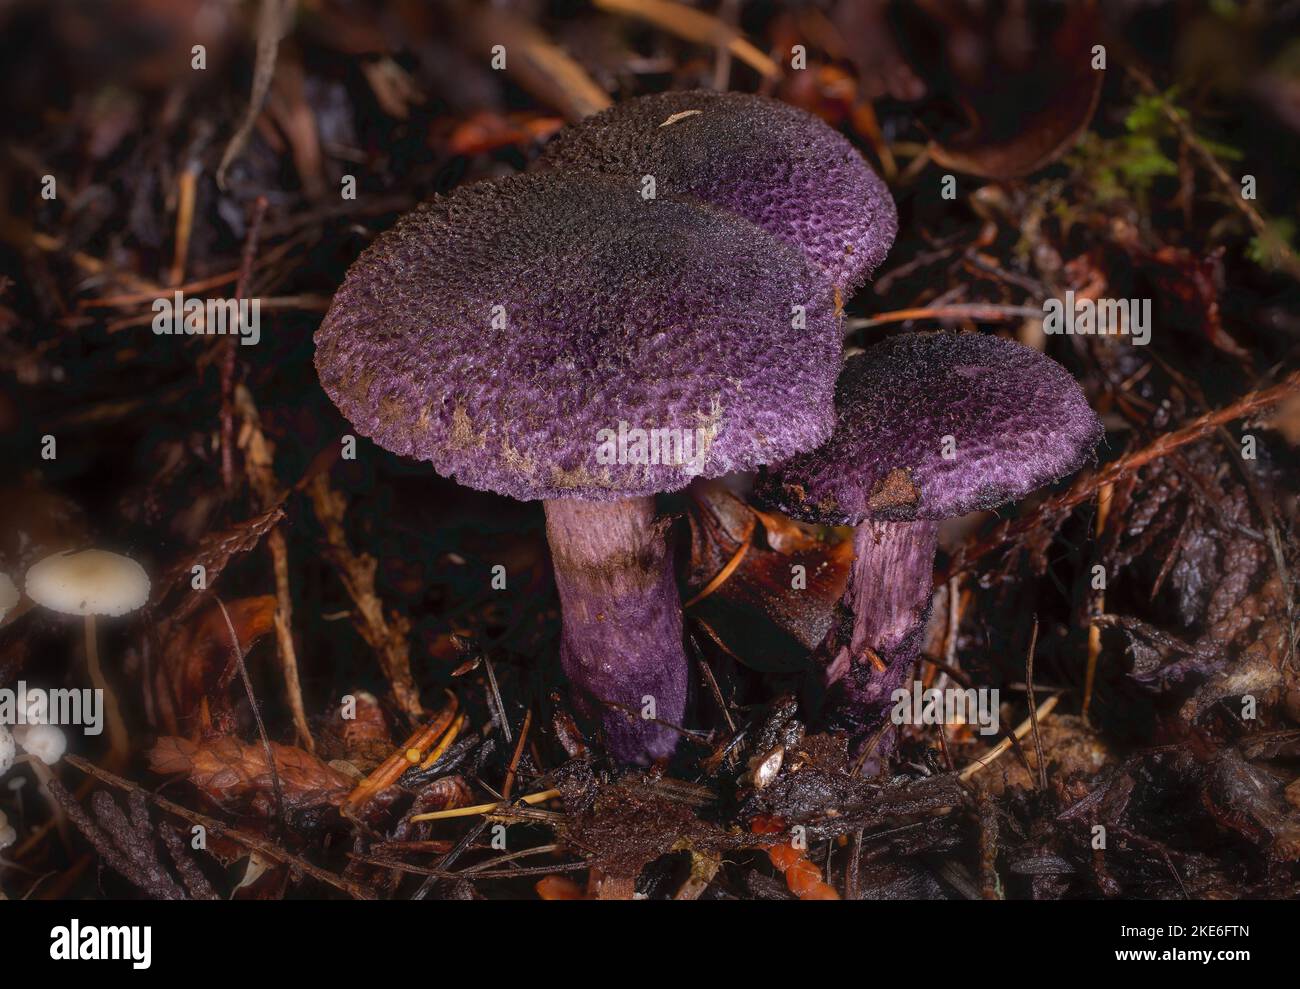 A small group of violet webcap mushrooms, Cortinarius violaceus, found growing along Treemile Creek, in the mountains, west of Troy, Montana. Stock Photo